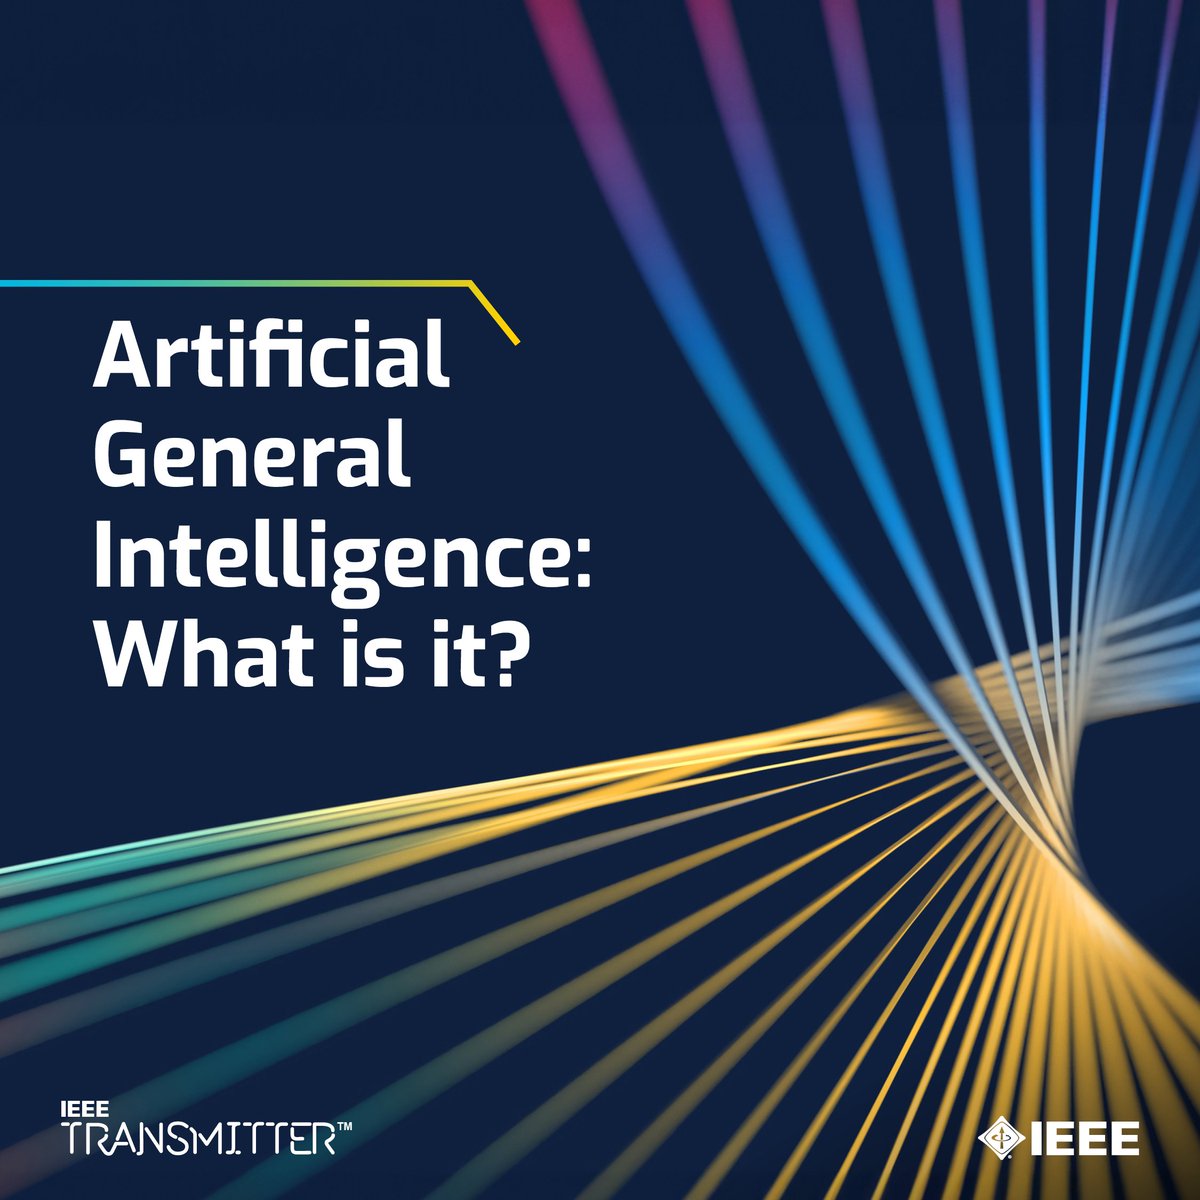 AI with human-like reasoning abilities, also known as artificial general intelligence (AGI), feels like science fiction. But, are chatbots making AGI a reality today? Read more on #IEEE Transmitter: bit.ly/3yldEI1